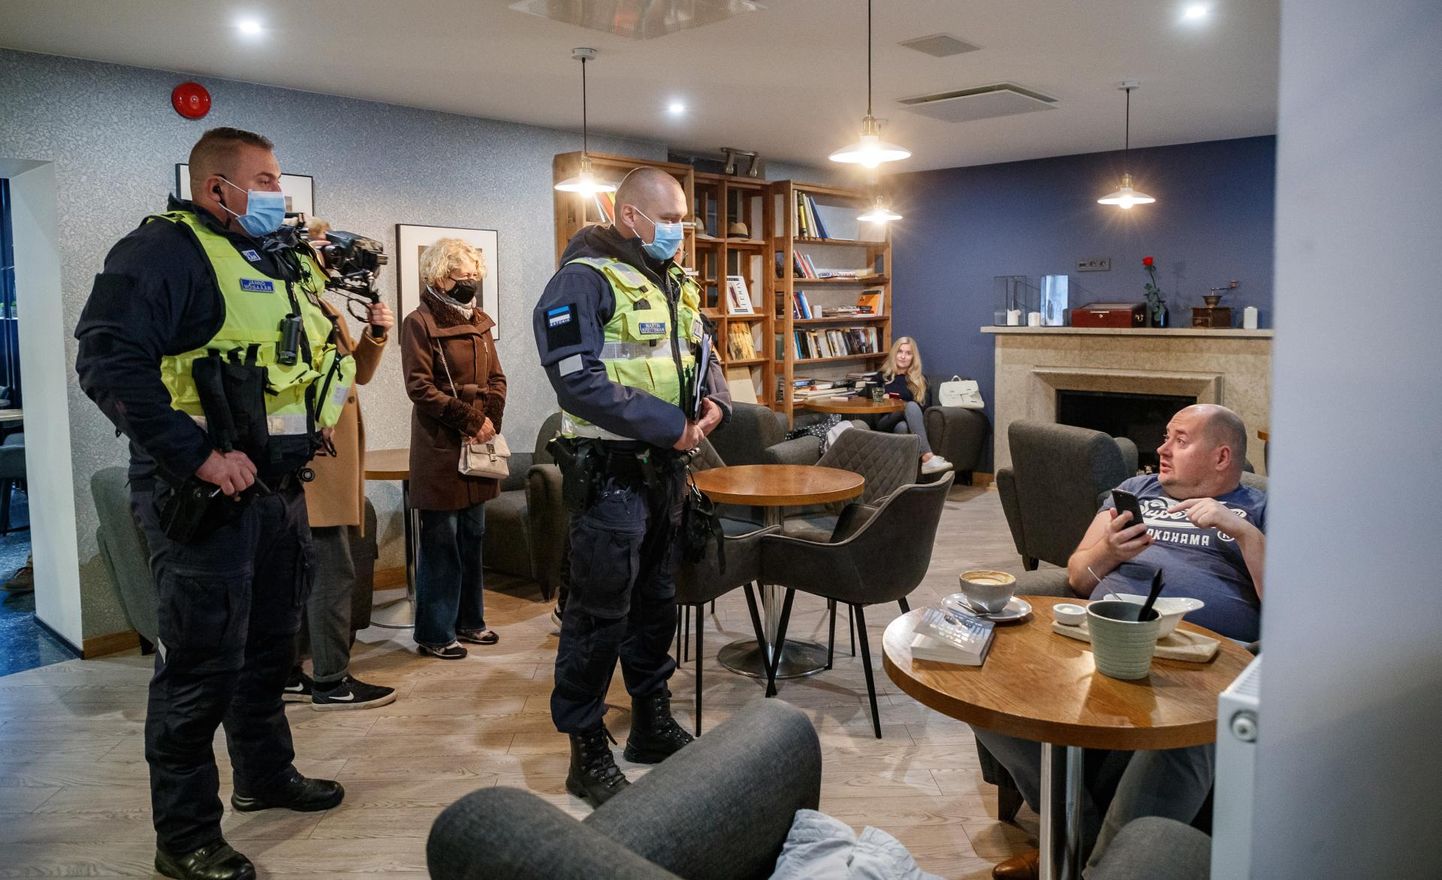 The Gourmet Coffee restaurant in Kadriorg. The Health Board and the police were checking compliance with the obligation to ask customers to produce COVID-19 vaccination certificates.